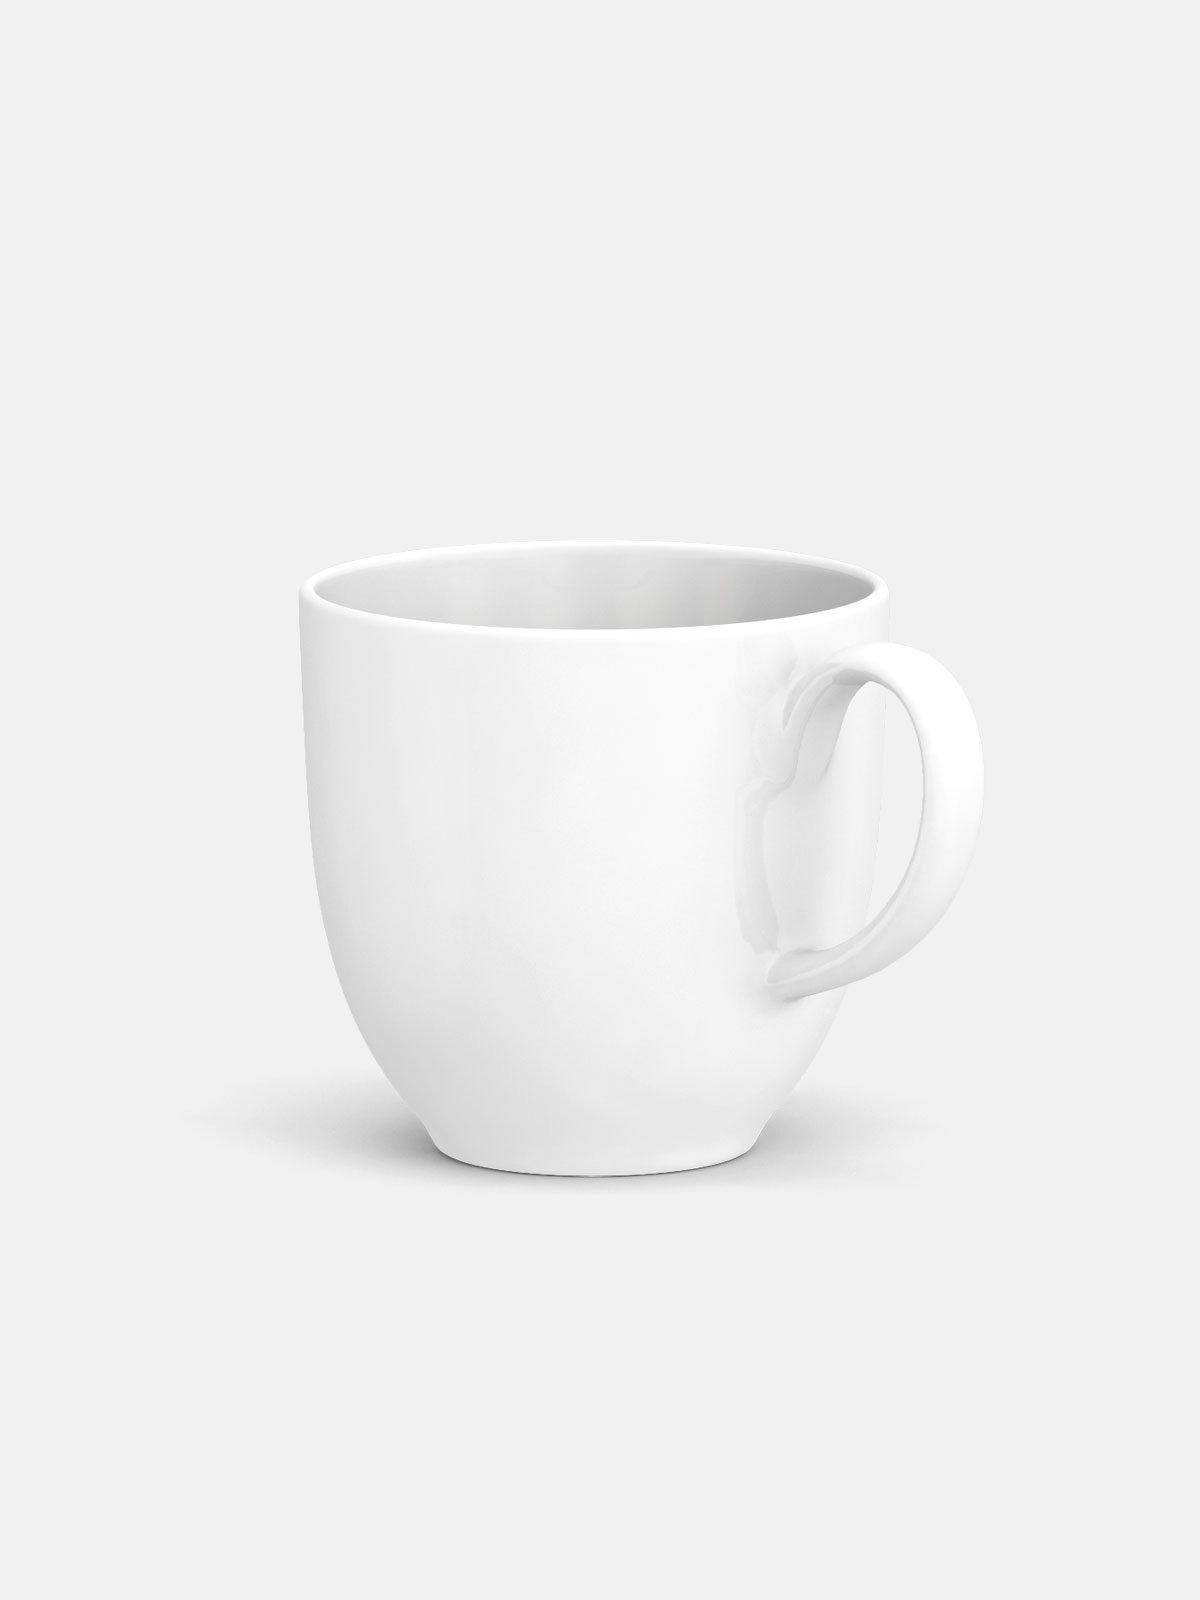 Small coffee cup - Blackline Management